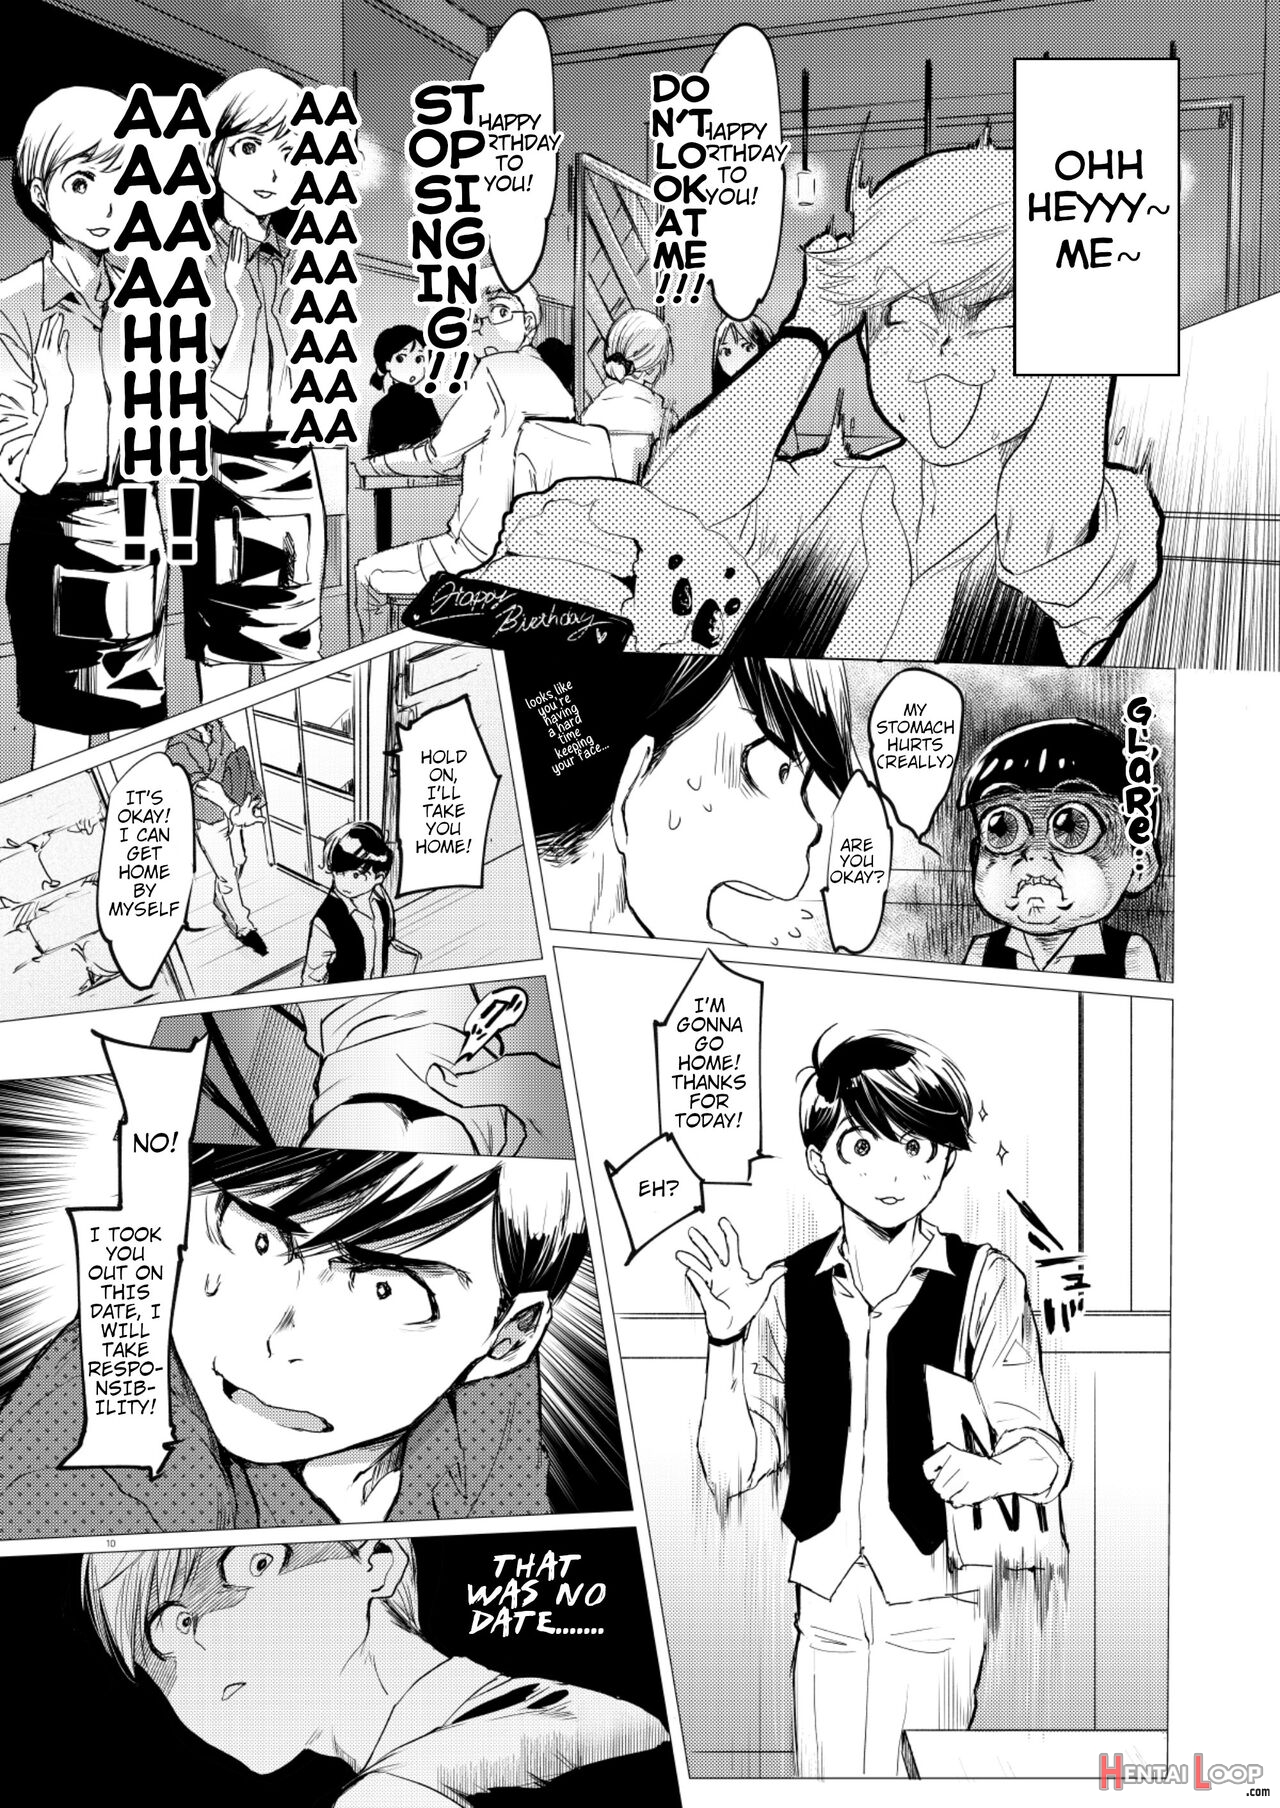 Thank You Youngest! Volume 1 page 9